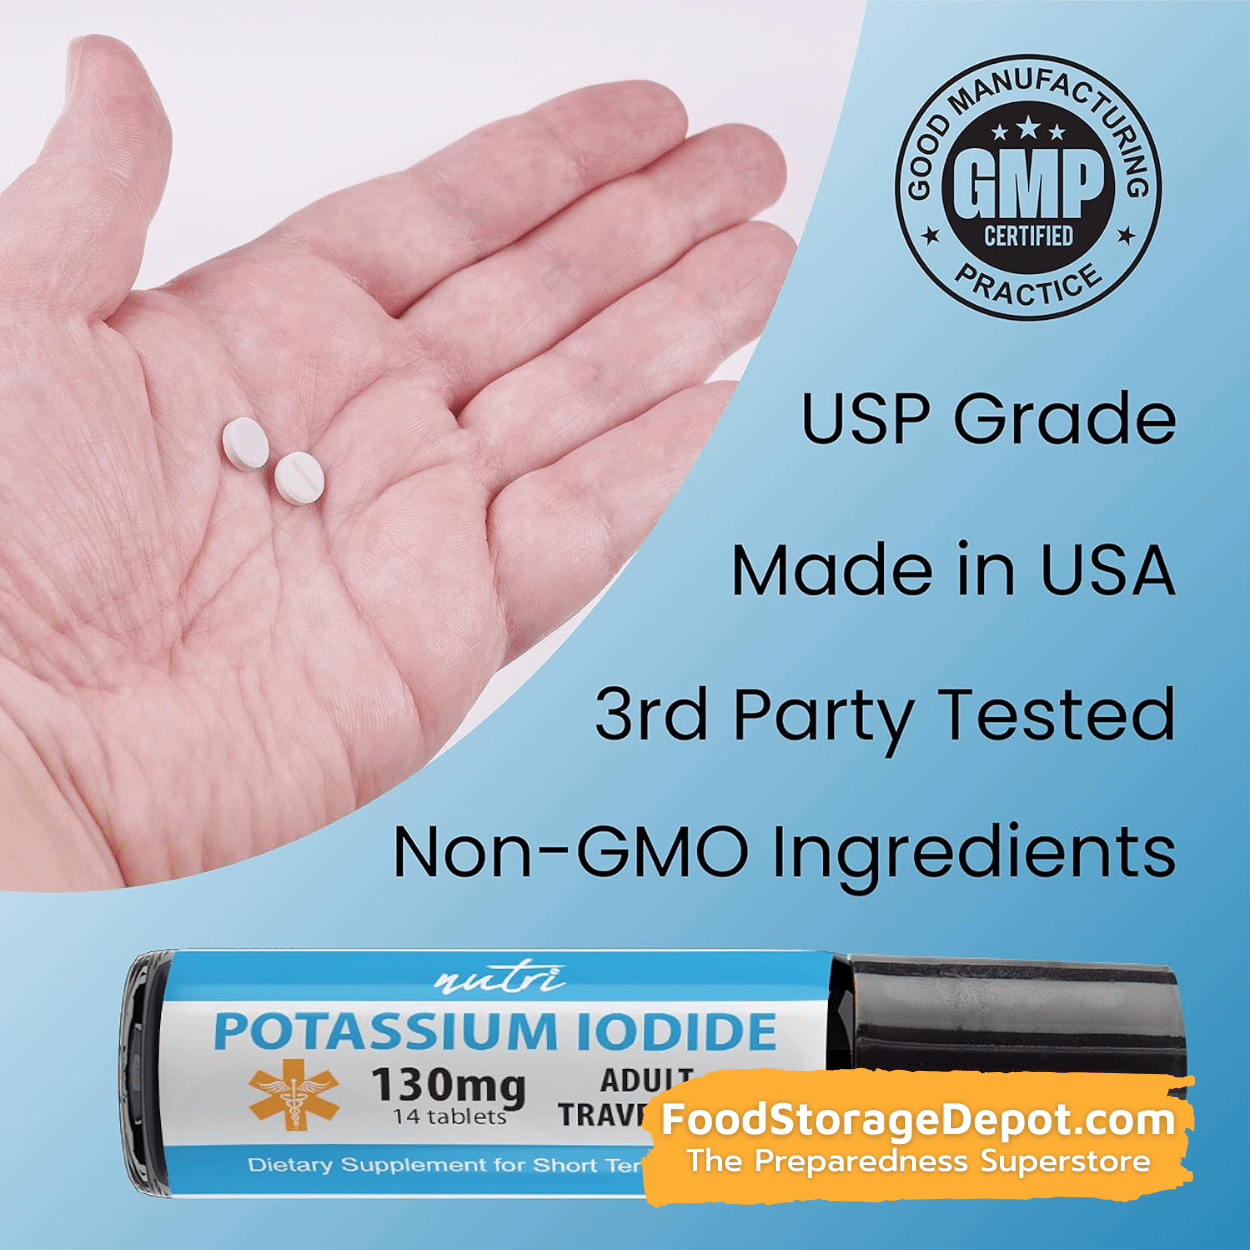 Potassium Iodide 130mg Tablets for Adults - Travel Version (14 Count)